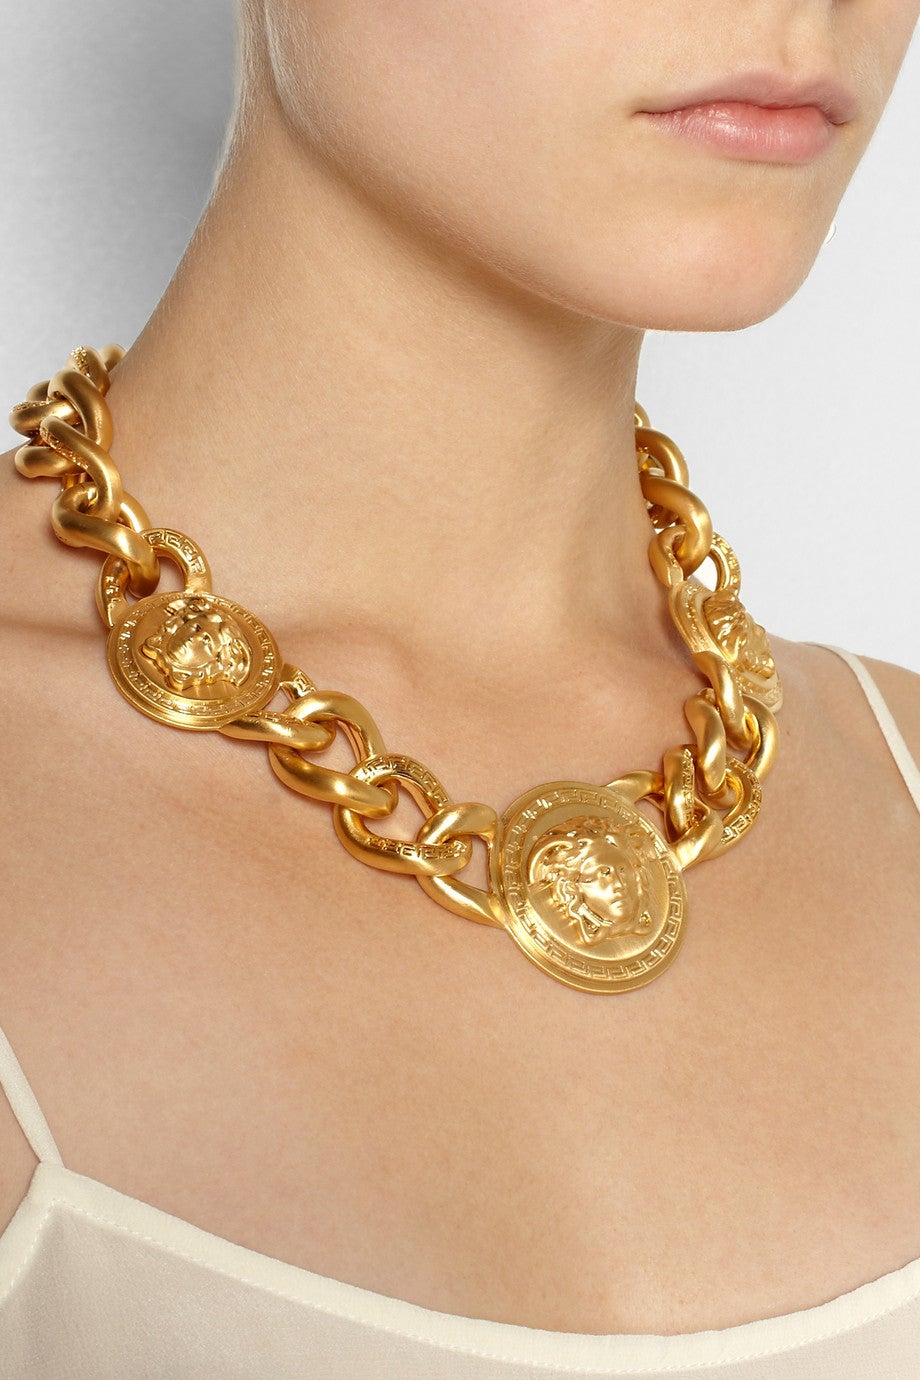 Baroque Versace Triple Medusa Charm 24K Gold Plated Chain Necklace as seen on Bella